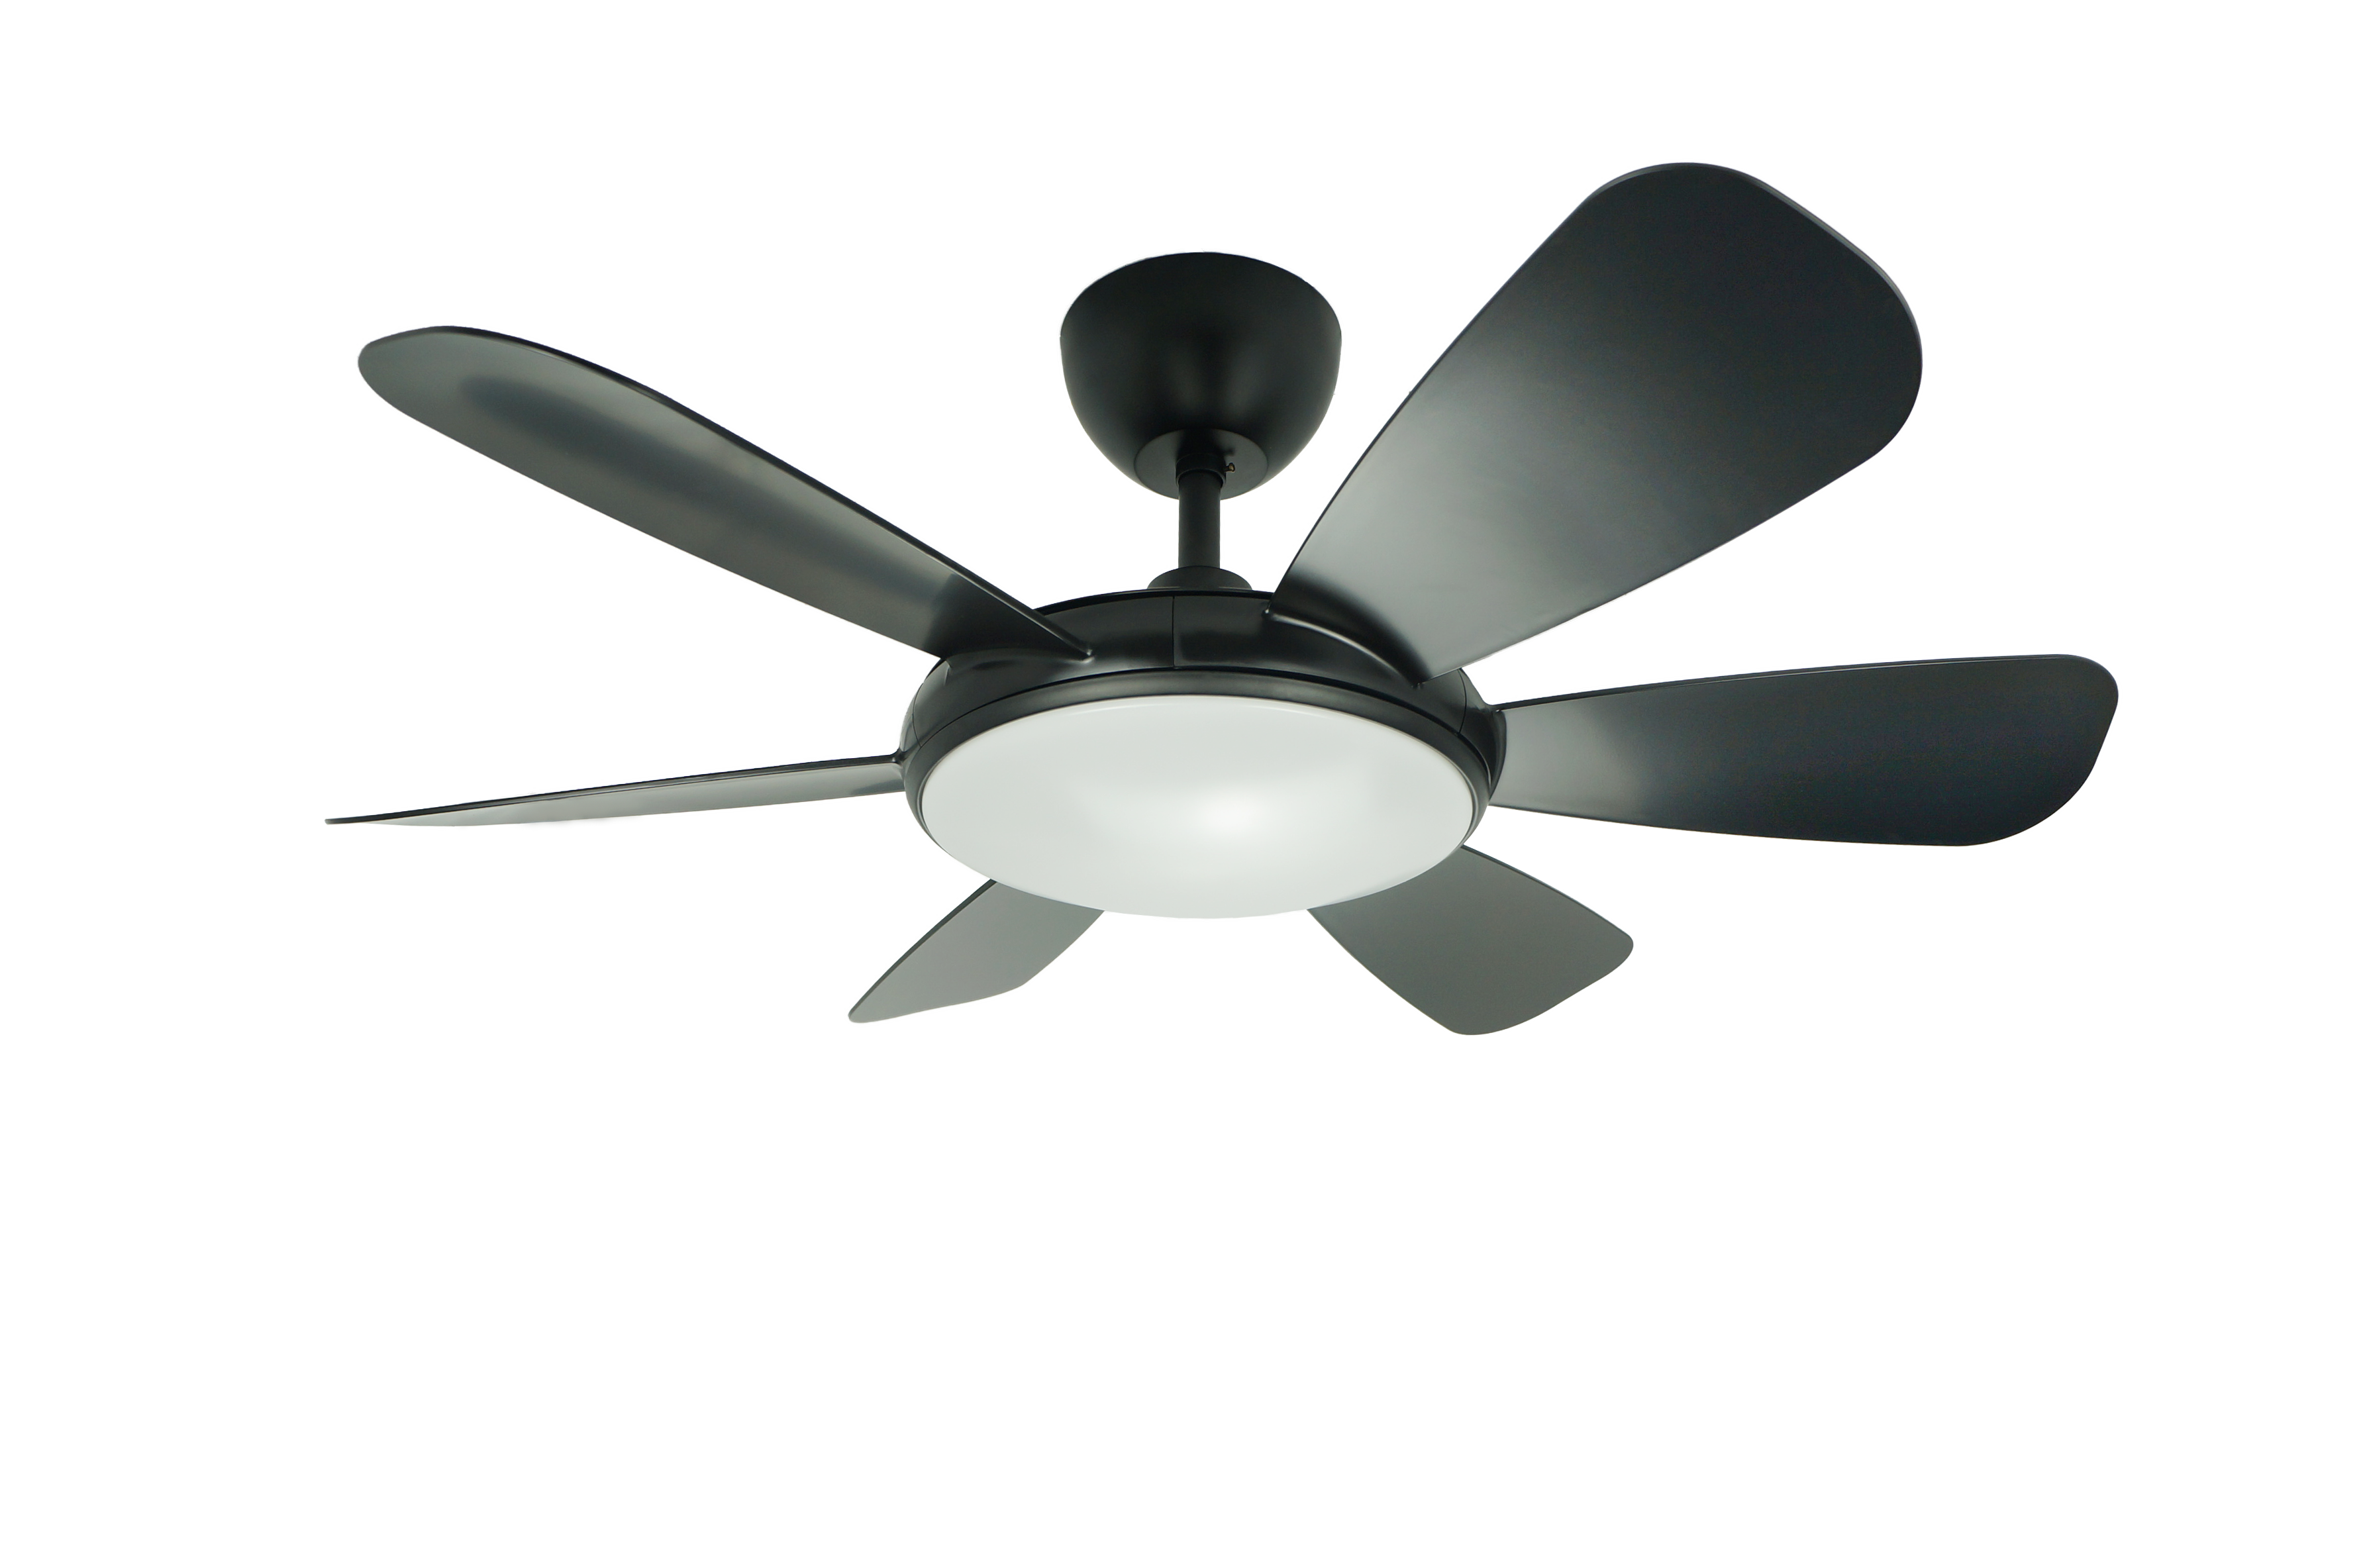 Sophisticated 42-inch Decorative Ceiling Fan with Whisper-Quiet DC Motor And Soft Warm LED Light